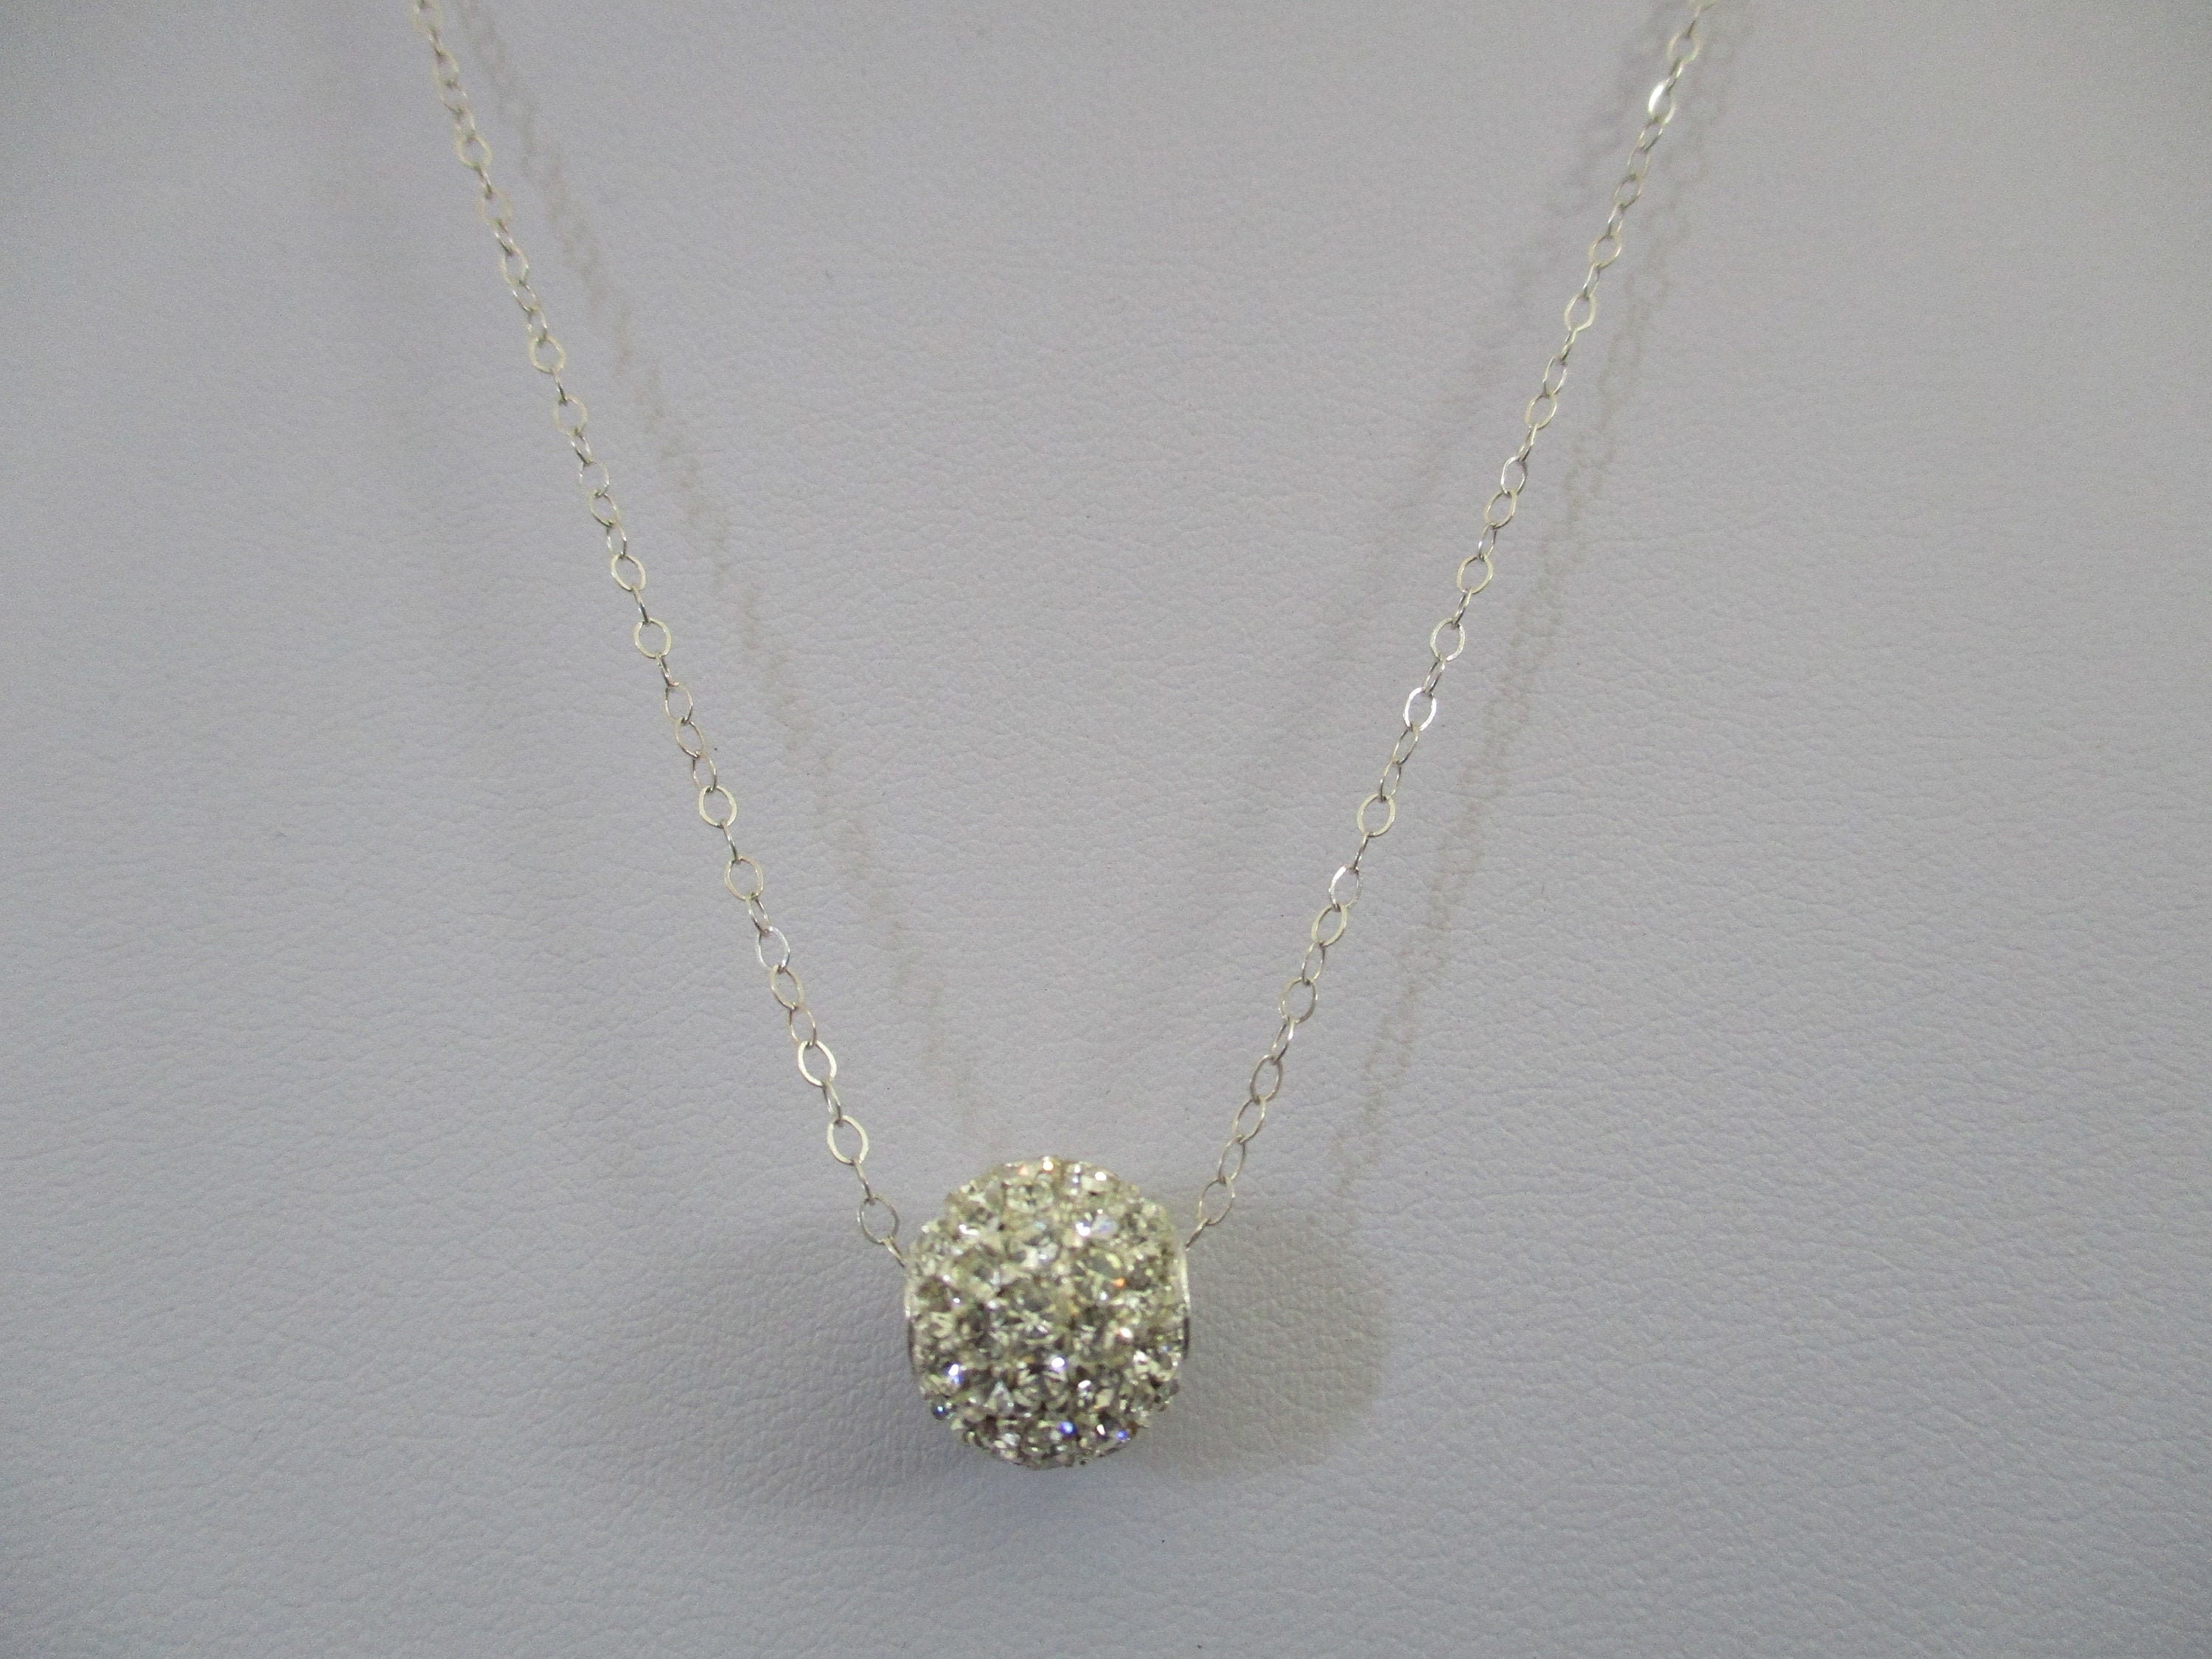 A sterling silver stamped 925 on clasp chain necklace with faceted crystals ball pendant charm